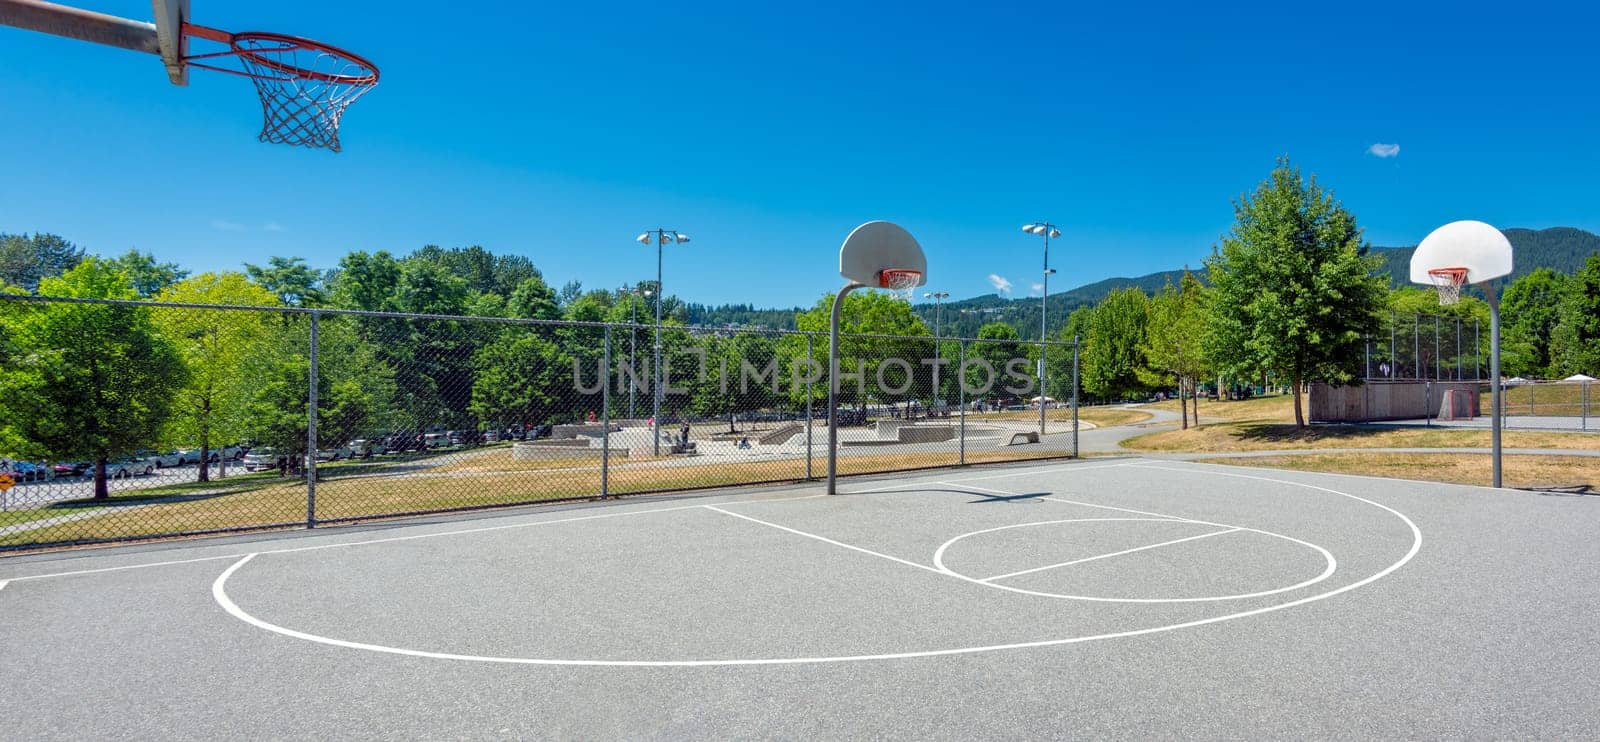 Playground with basketball court in a park on a bright sunny day in Vancouver